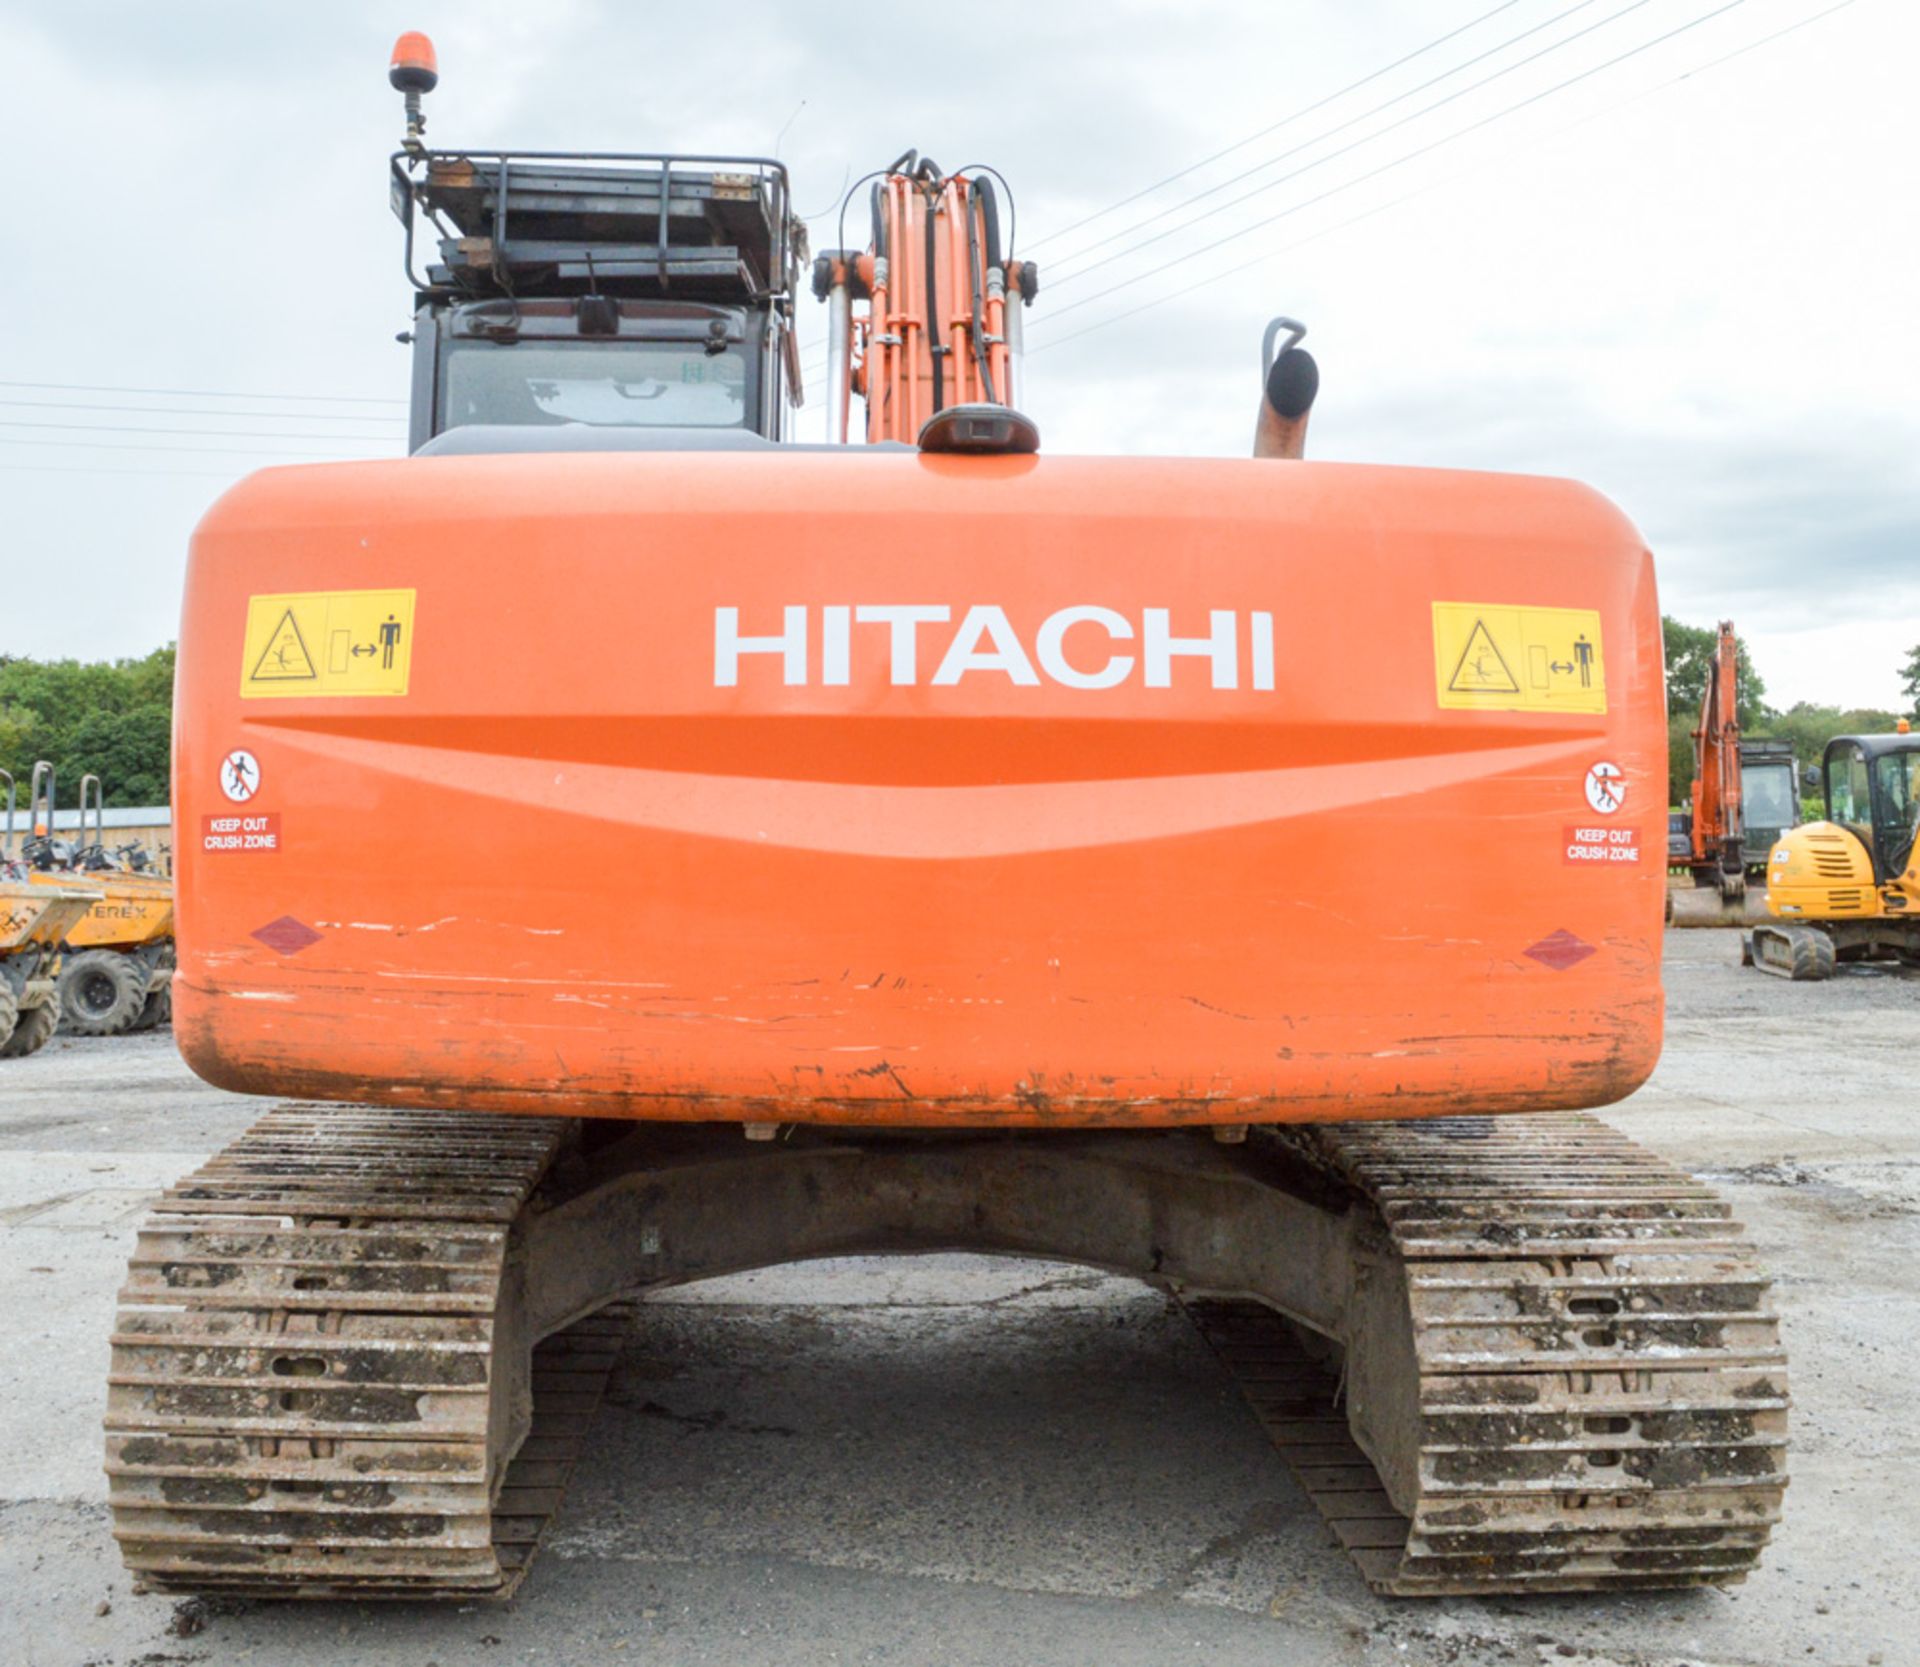 Hitachi Zaxis 210LC 21 tonne steel tracked excavator Year: 2008 S/N: 601306 Recorded Hours: 6876 - Image 6 of 15